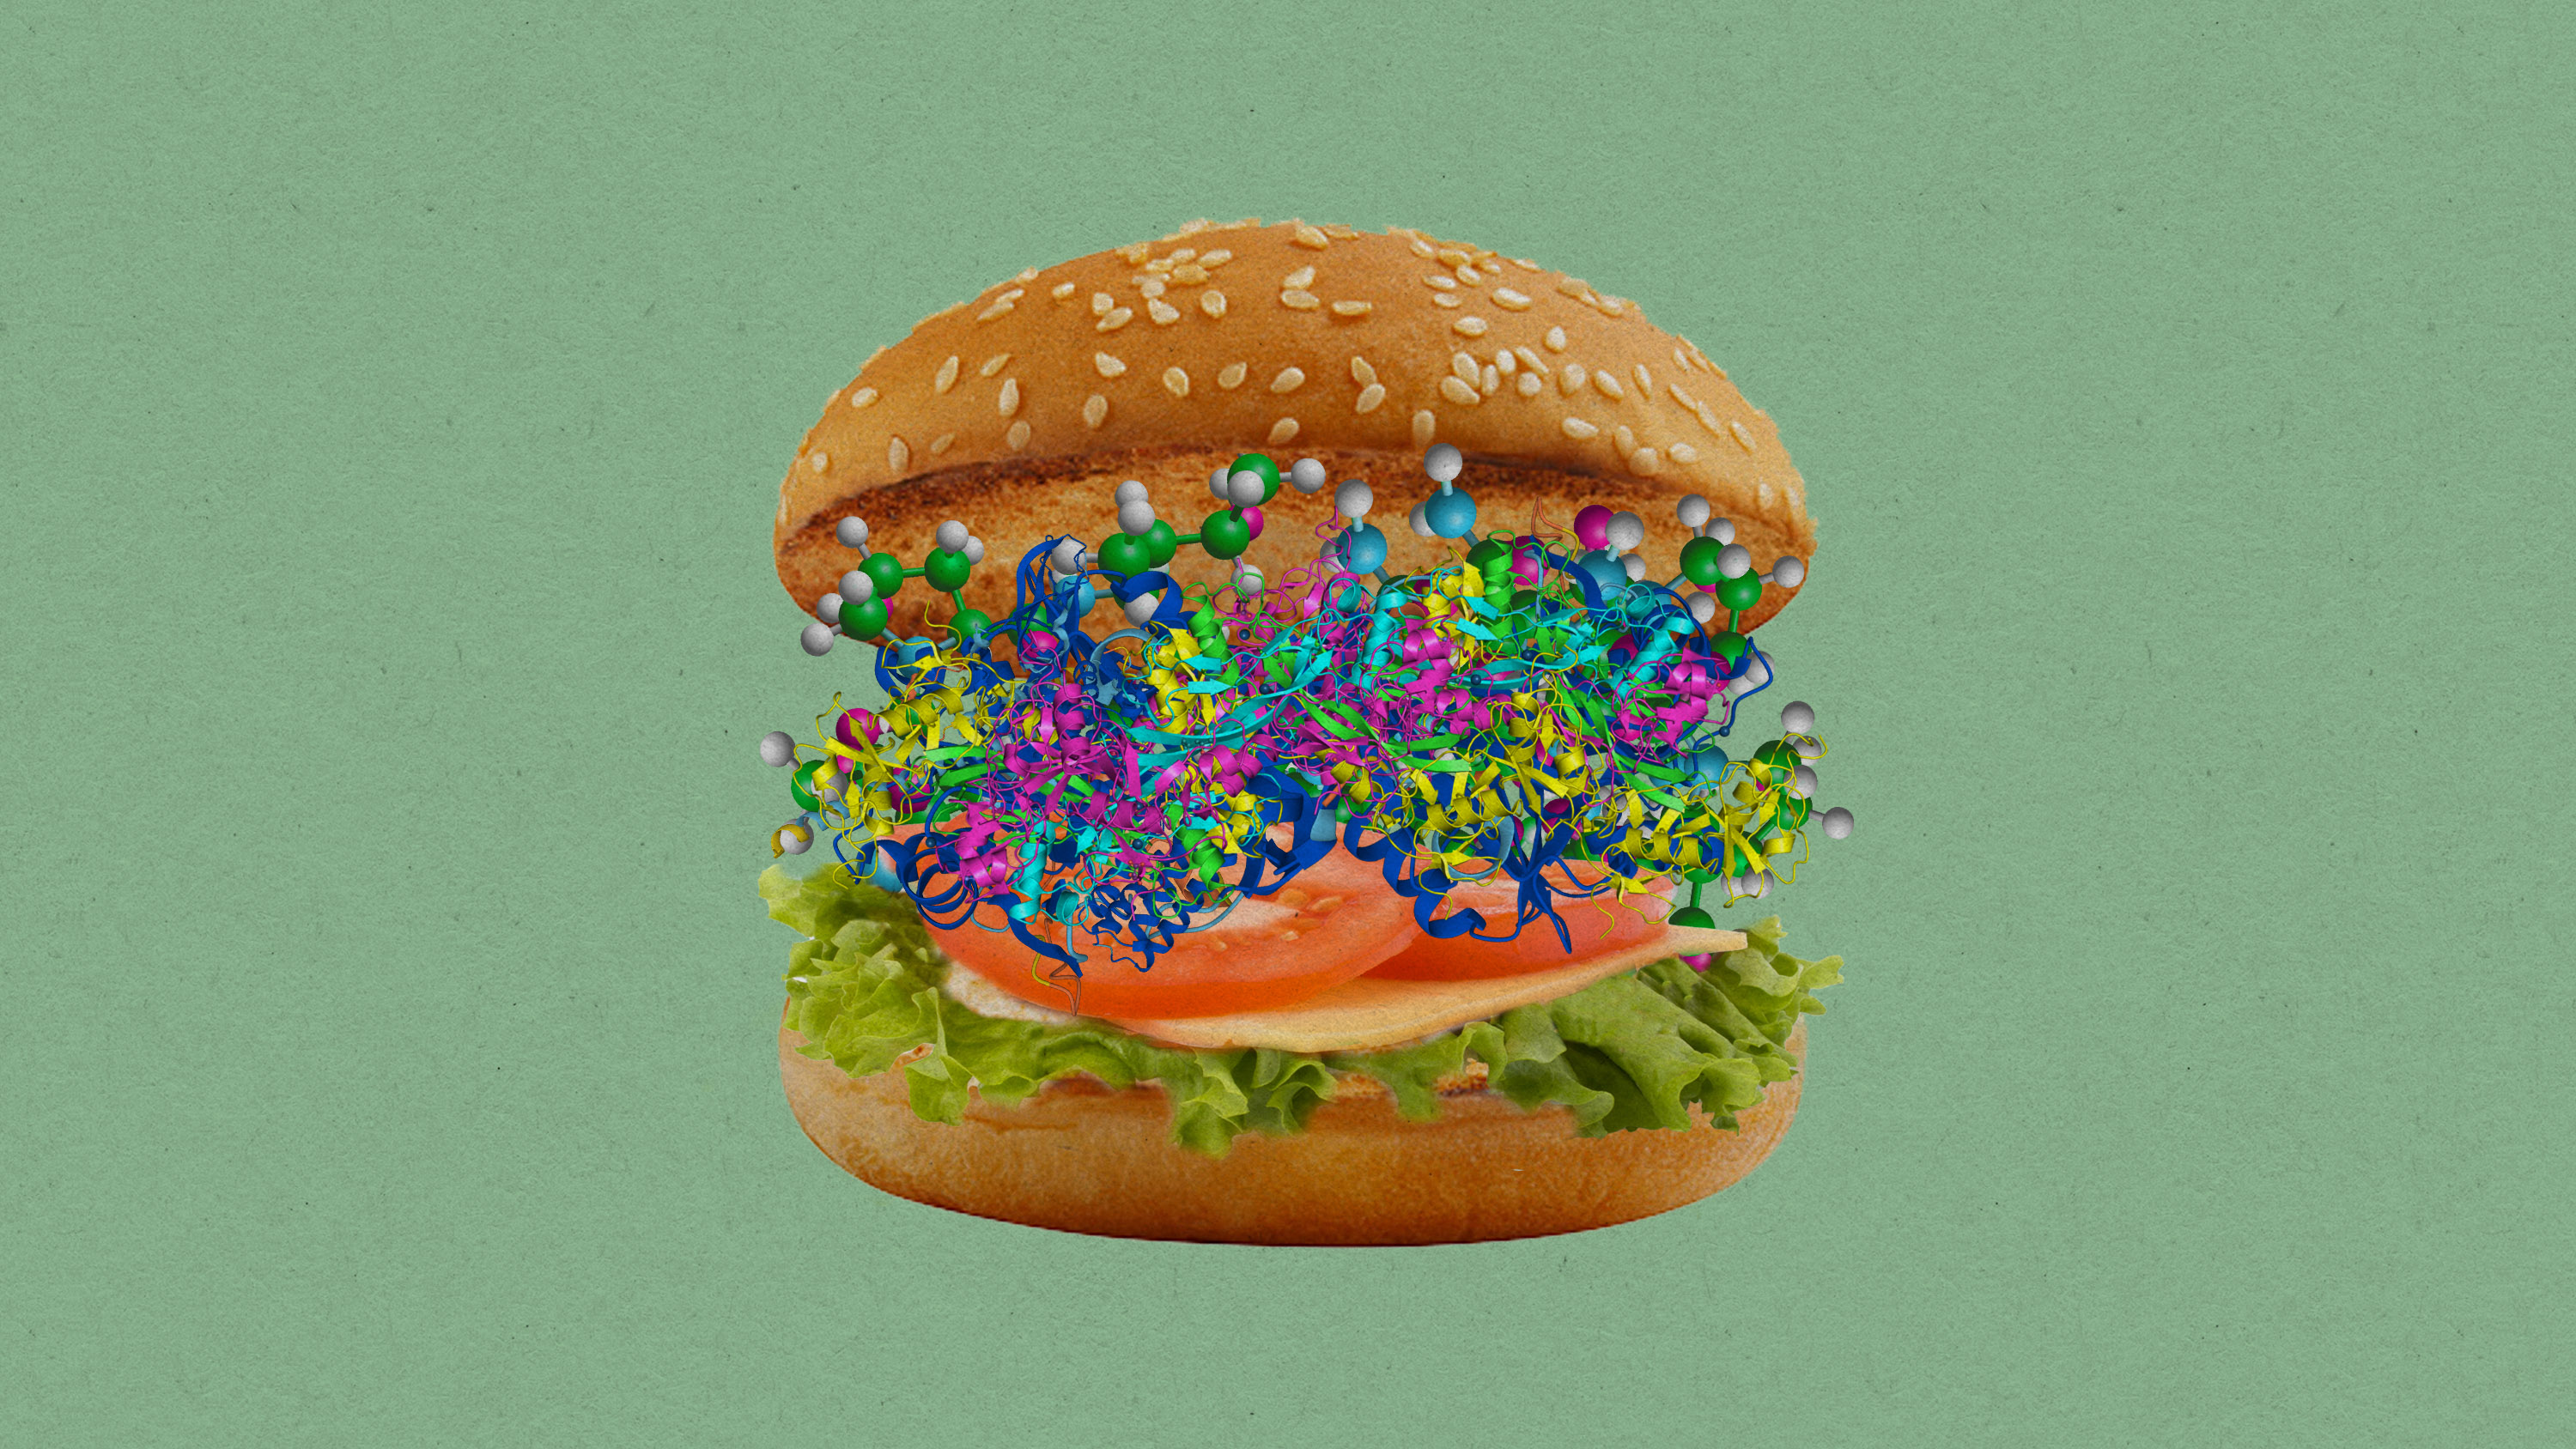 protein models in a hamburger bun with lettuce and tomato